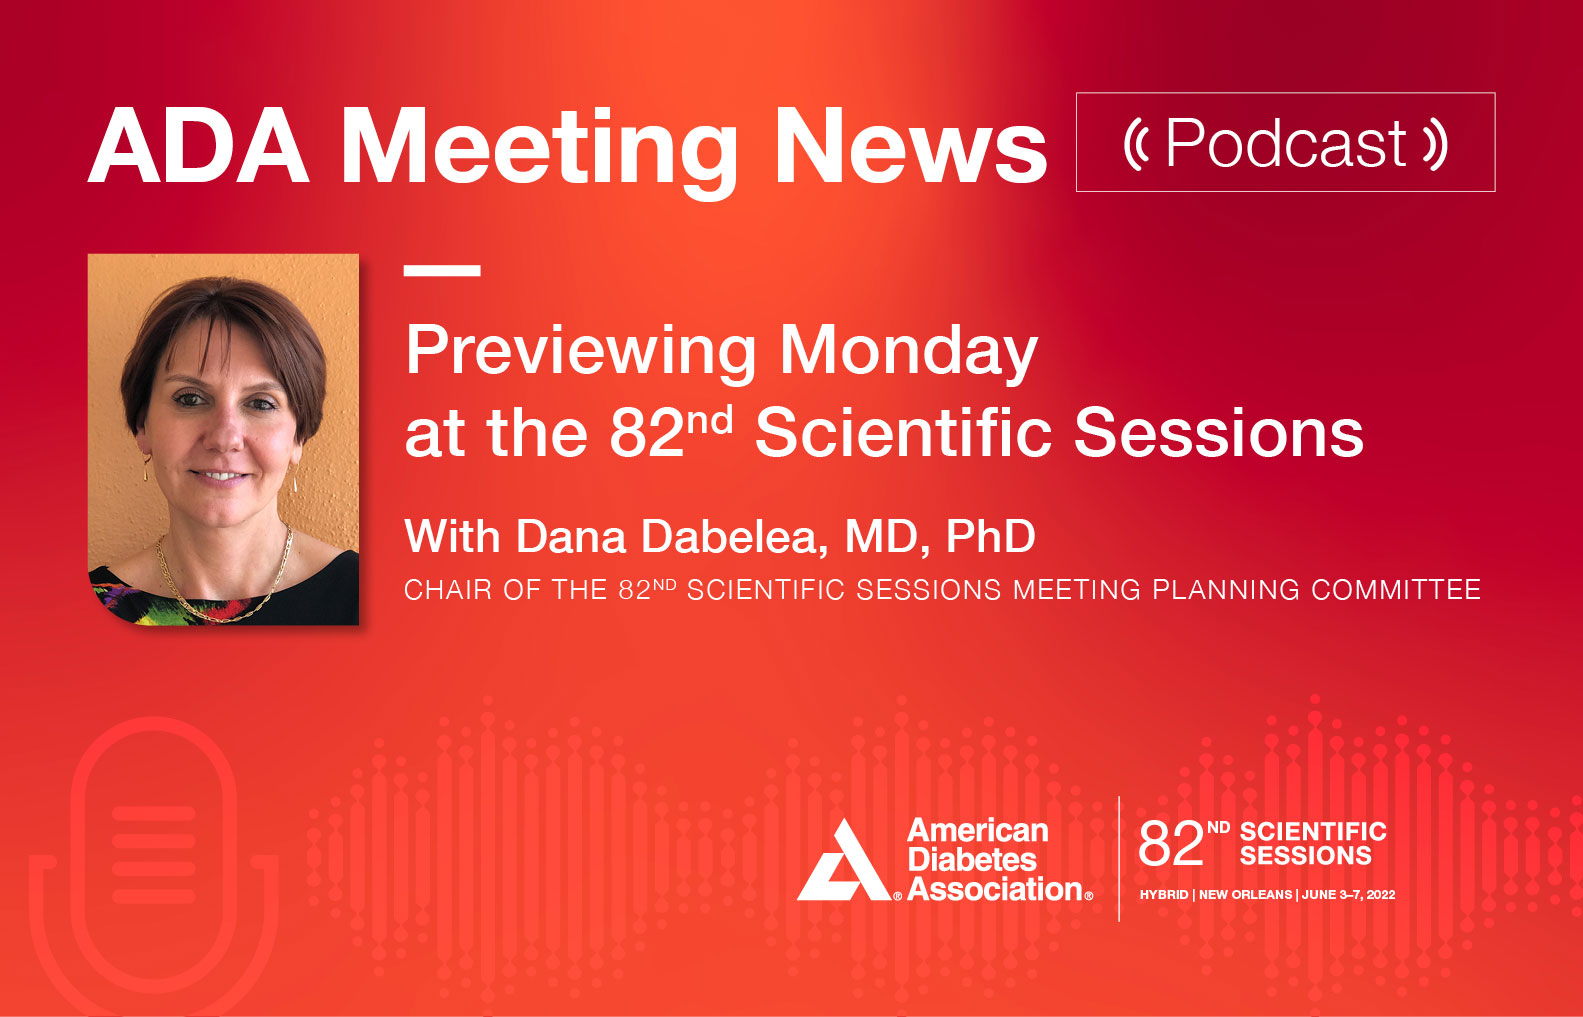 Episode 4: Looking Ahead to Monday at the 82nd Scientific Sessions